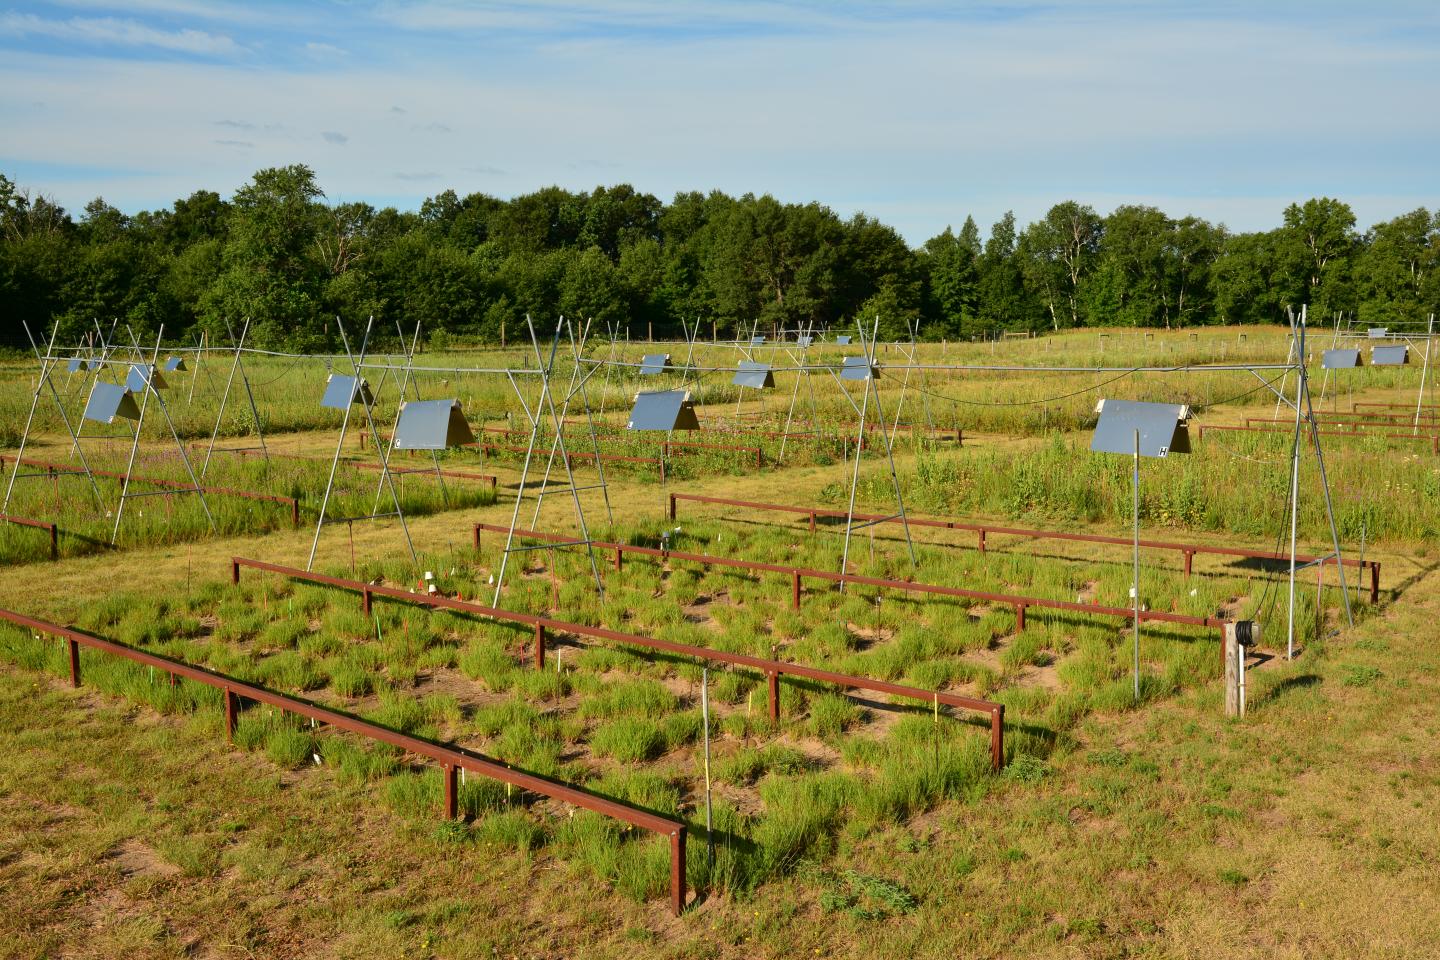 Experimental meadow plots with heating lamps